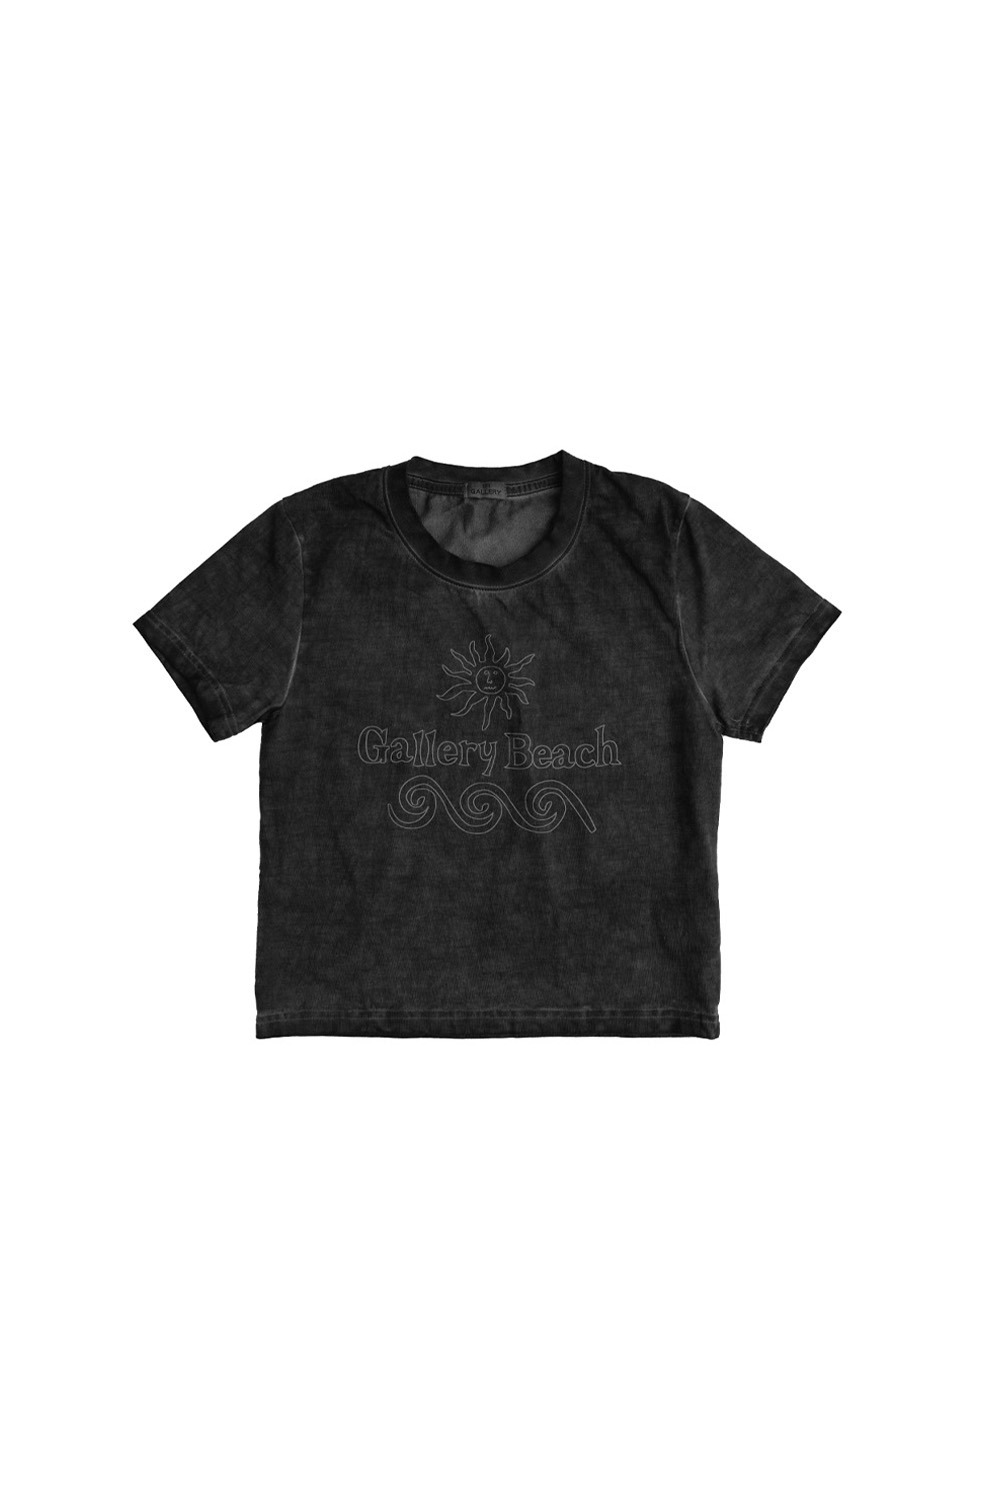 Gallery Beach Dying Baby T-shirt - Charcoal Grey